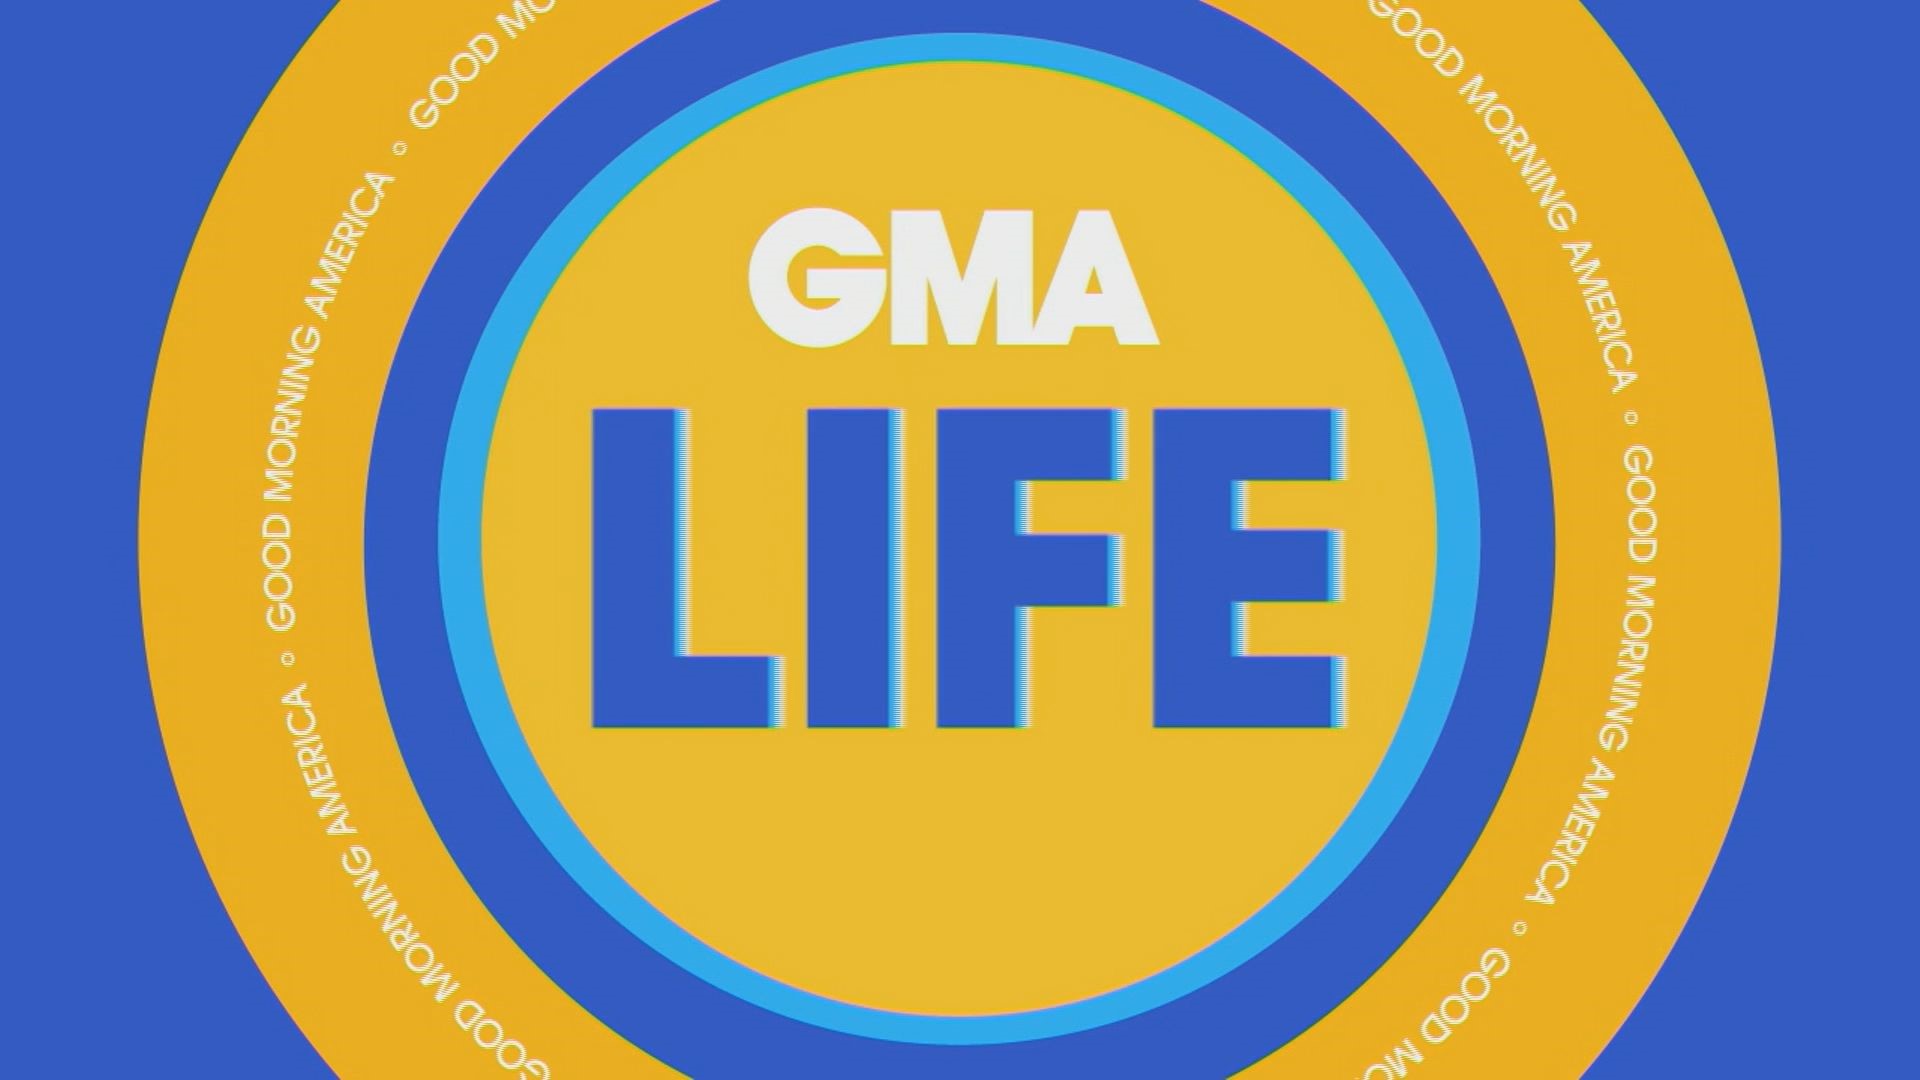 This week on GMA Life: Meet the new GMA Mascot, we’ll tell you about a program for kids to learn financial literacy, and Lori Bergamotto has The Right Stuff.